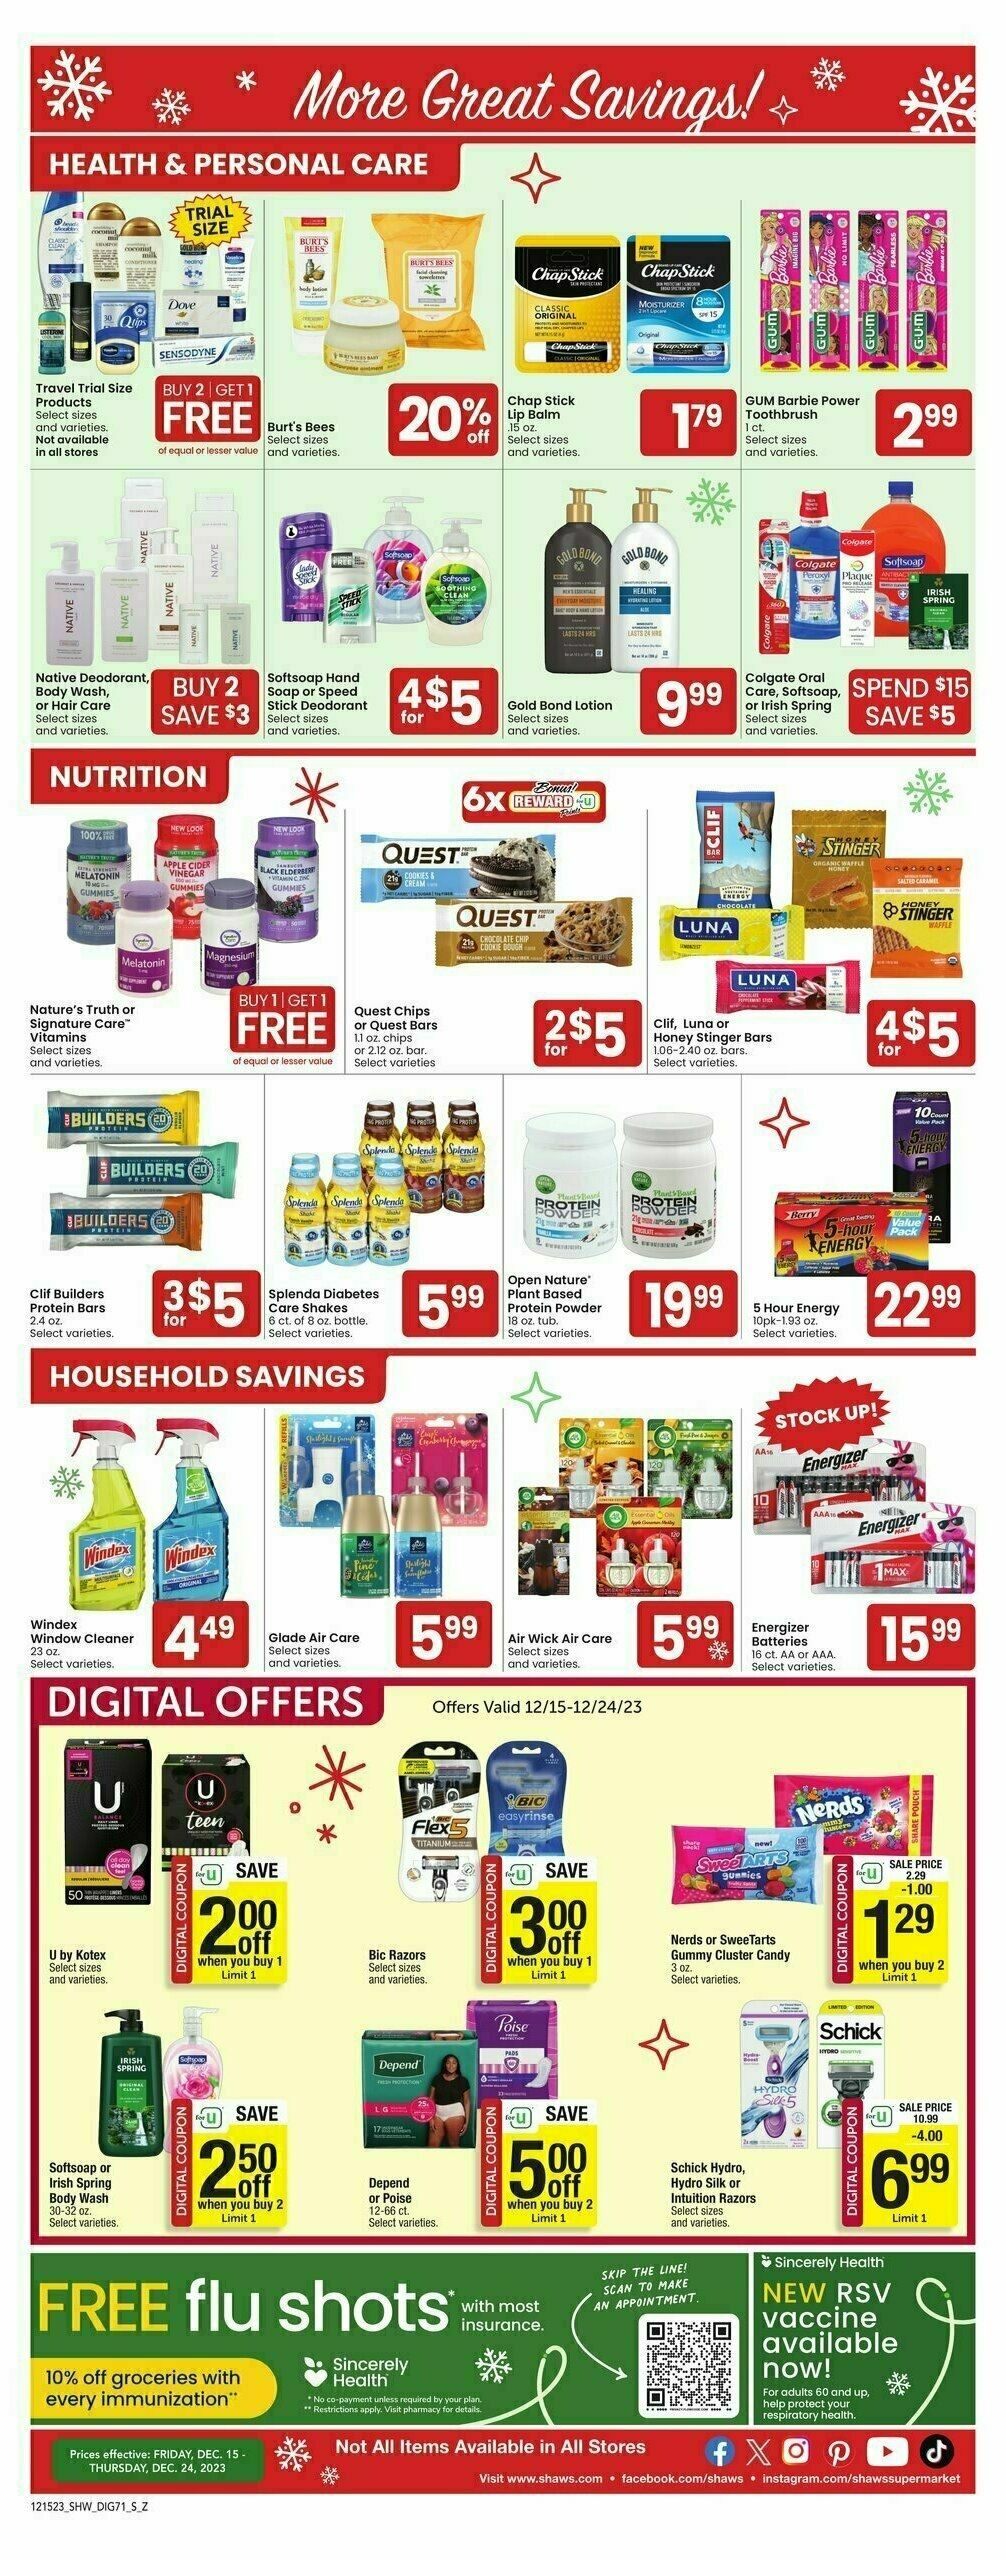 Shaw's Additional Savings Weekly Ad from December 15